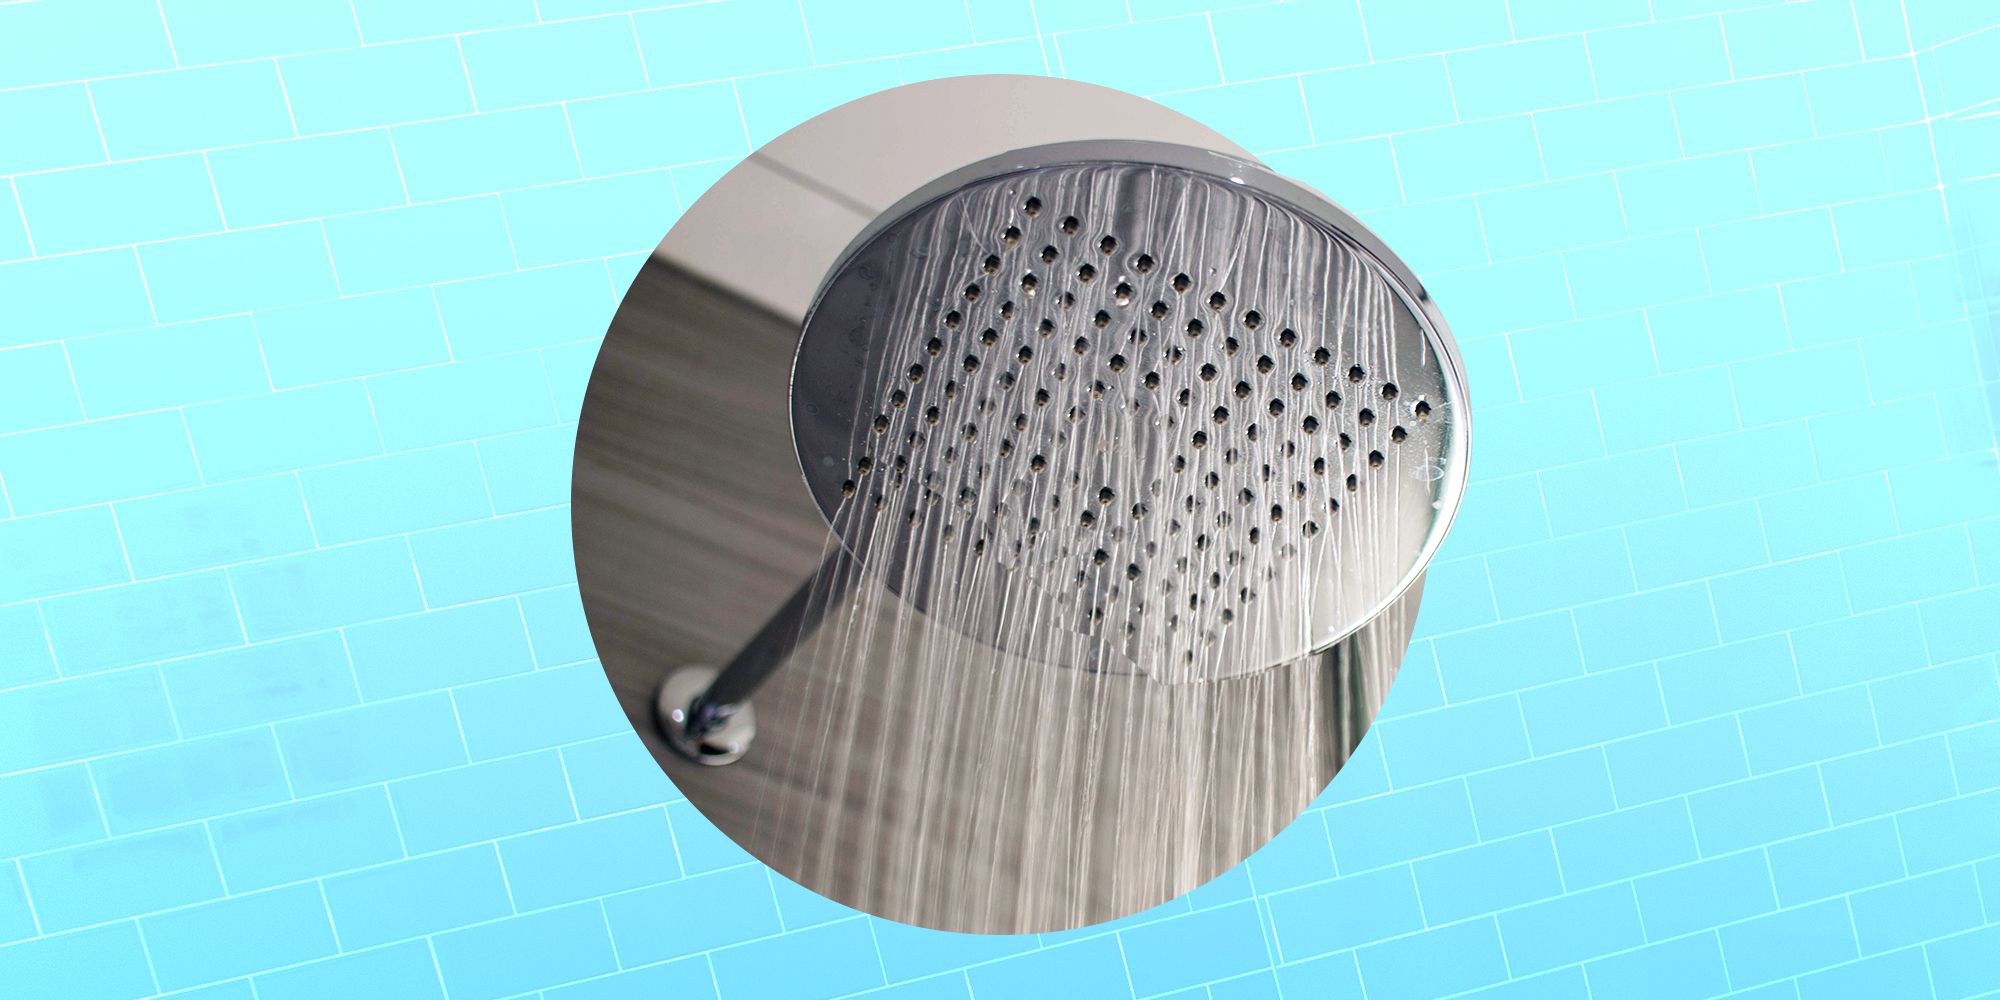 NEW Arromic Shower Head Salon-Style Skin Care Shower SSK-24N White With Tracking